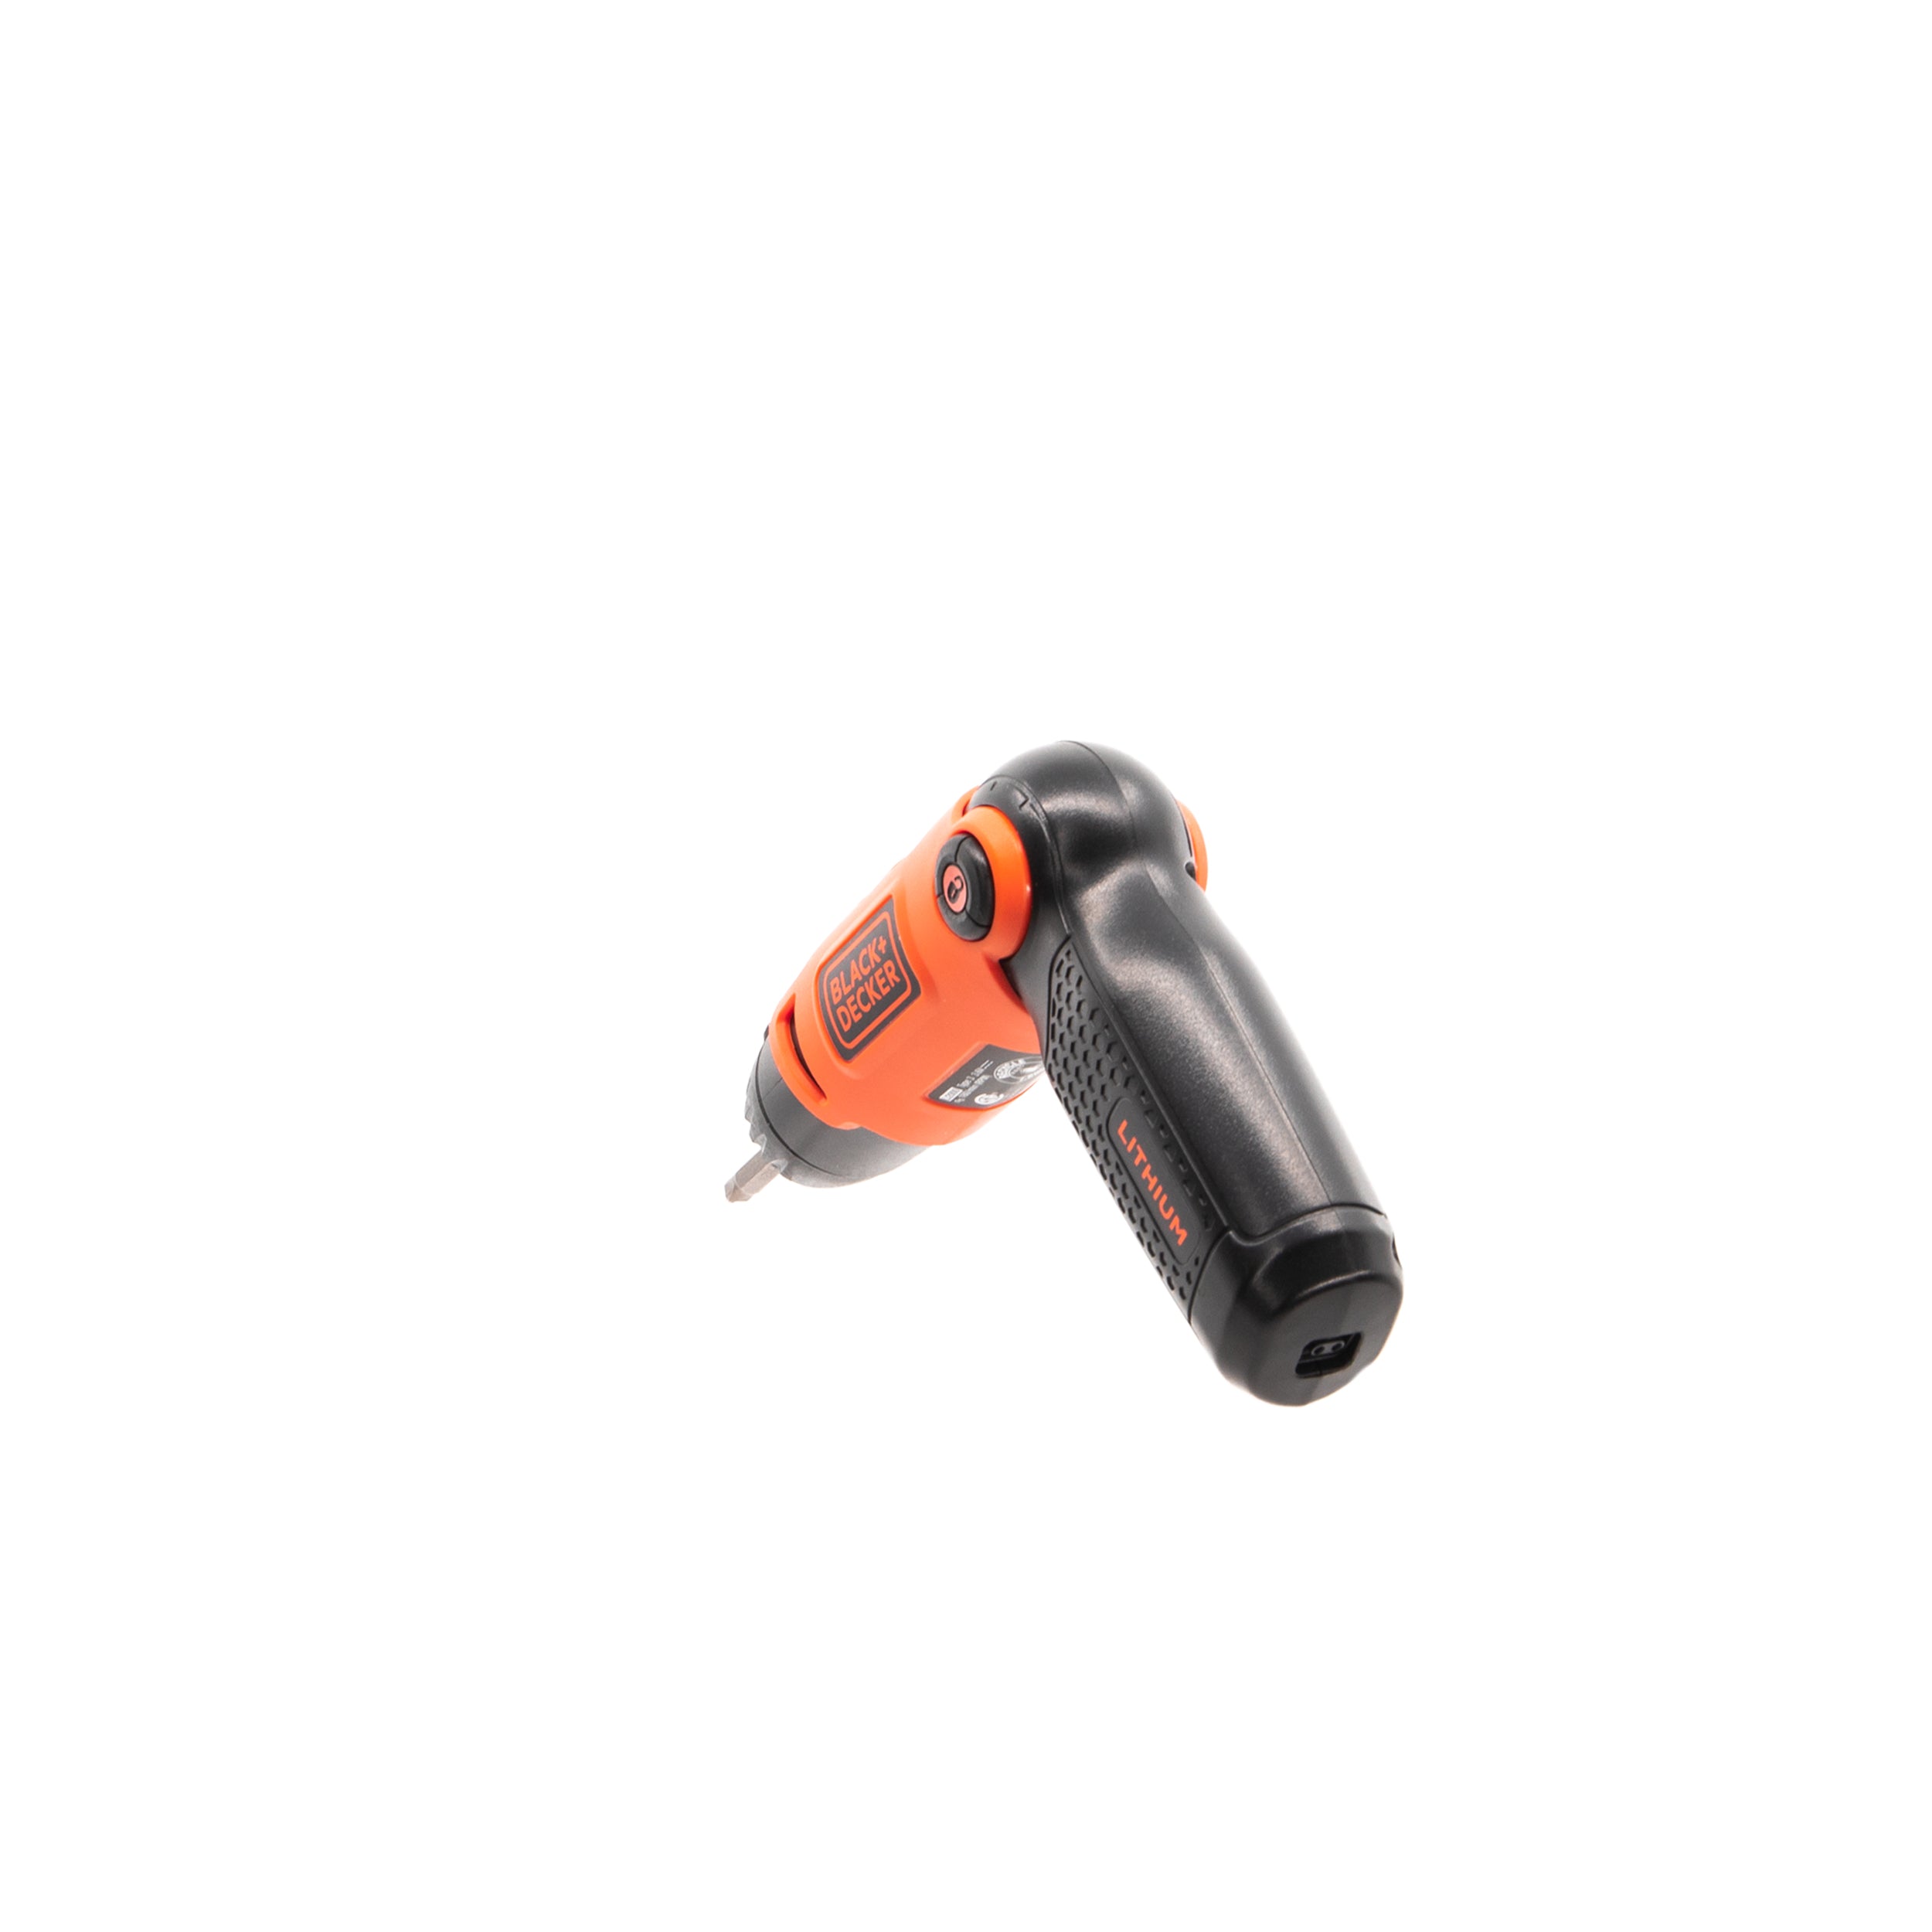 BLACK+DECKER Cordless Screwdriver with Pivoting Handle, Electric  Screwdriver, 180 RPM, 3.6V, Charger and 2 Hex Shank Bits Included (Li2000)